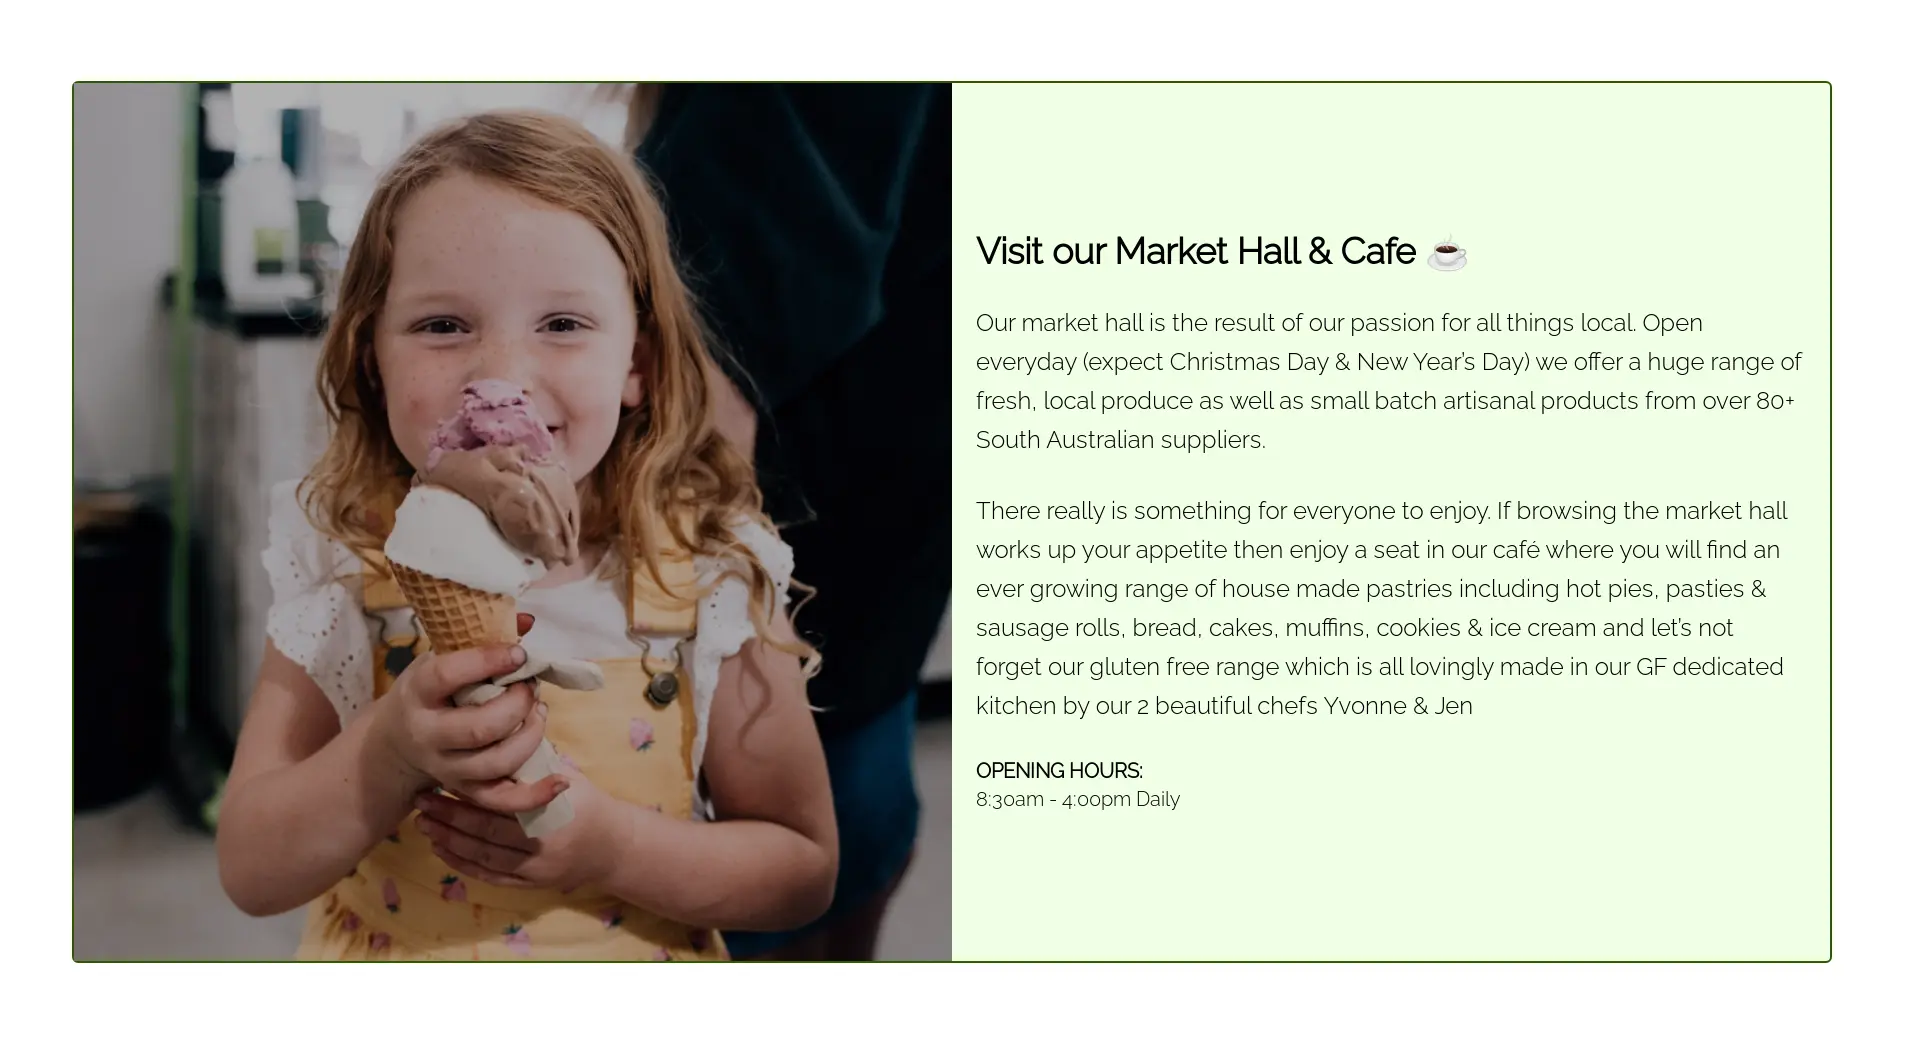 A section from the Harvest the Fleurieu website with a young girl with ice cream smiling.